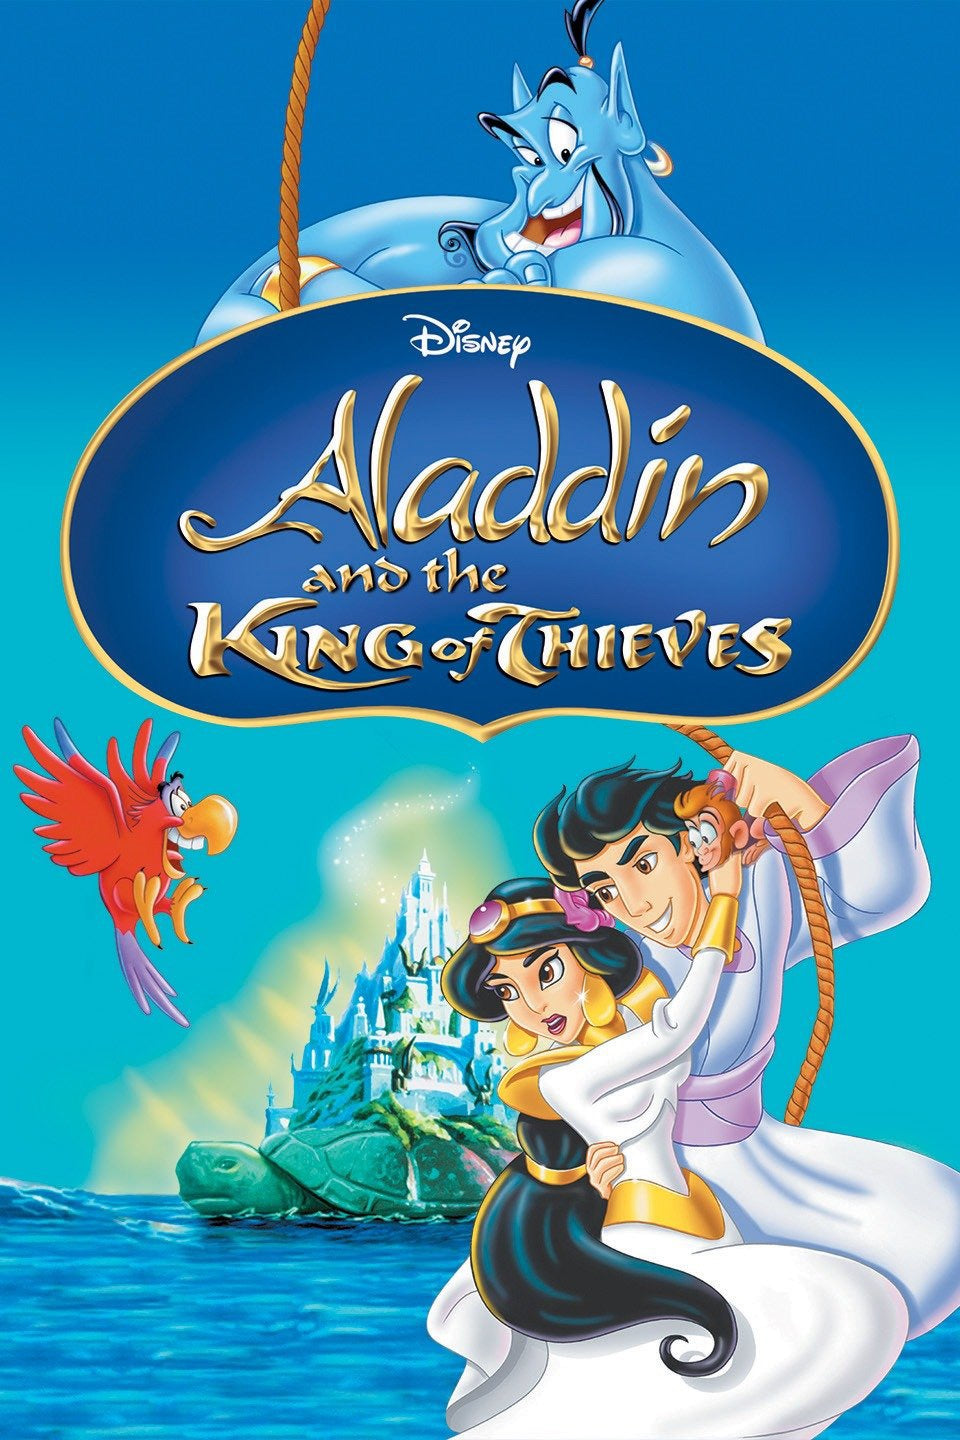 Aladdin And The King of Thieves (1996) Vudu or Movies Anywhere HD redemption only